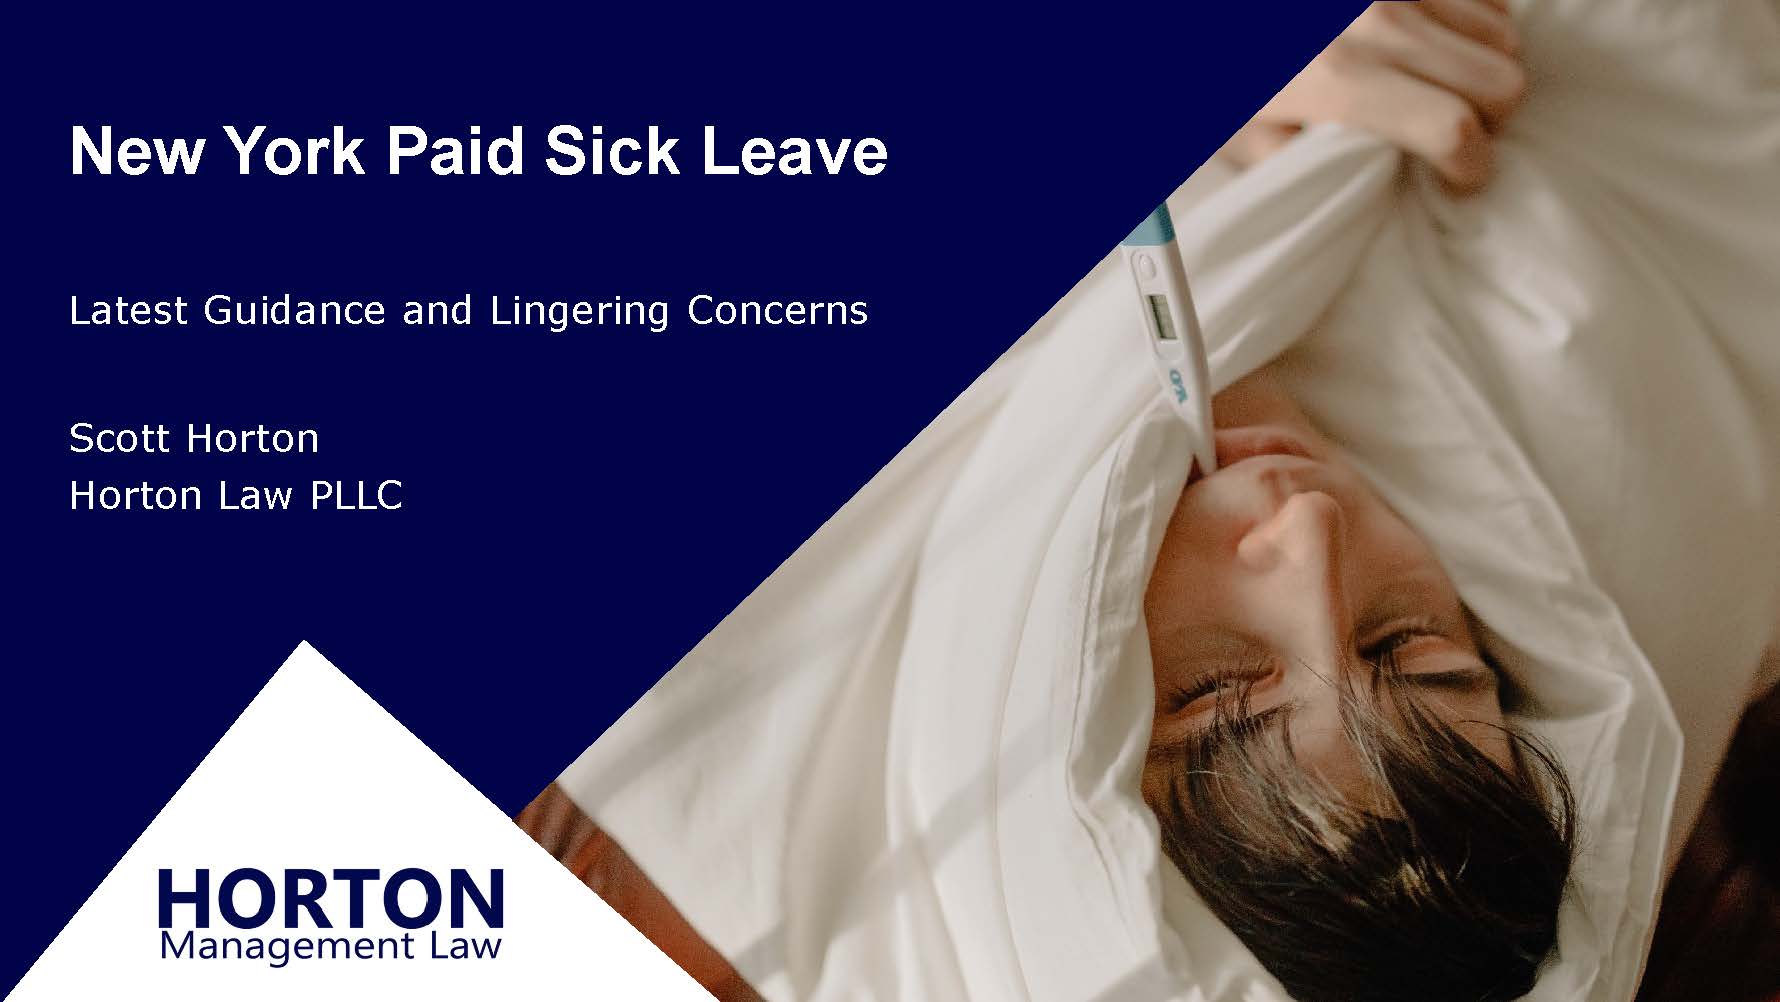 New York Paid Sick Leave